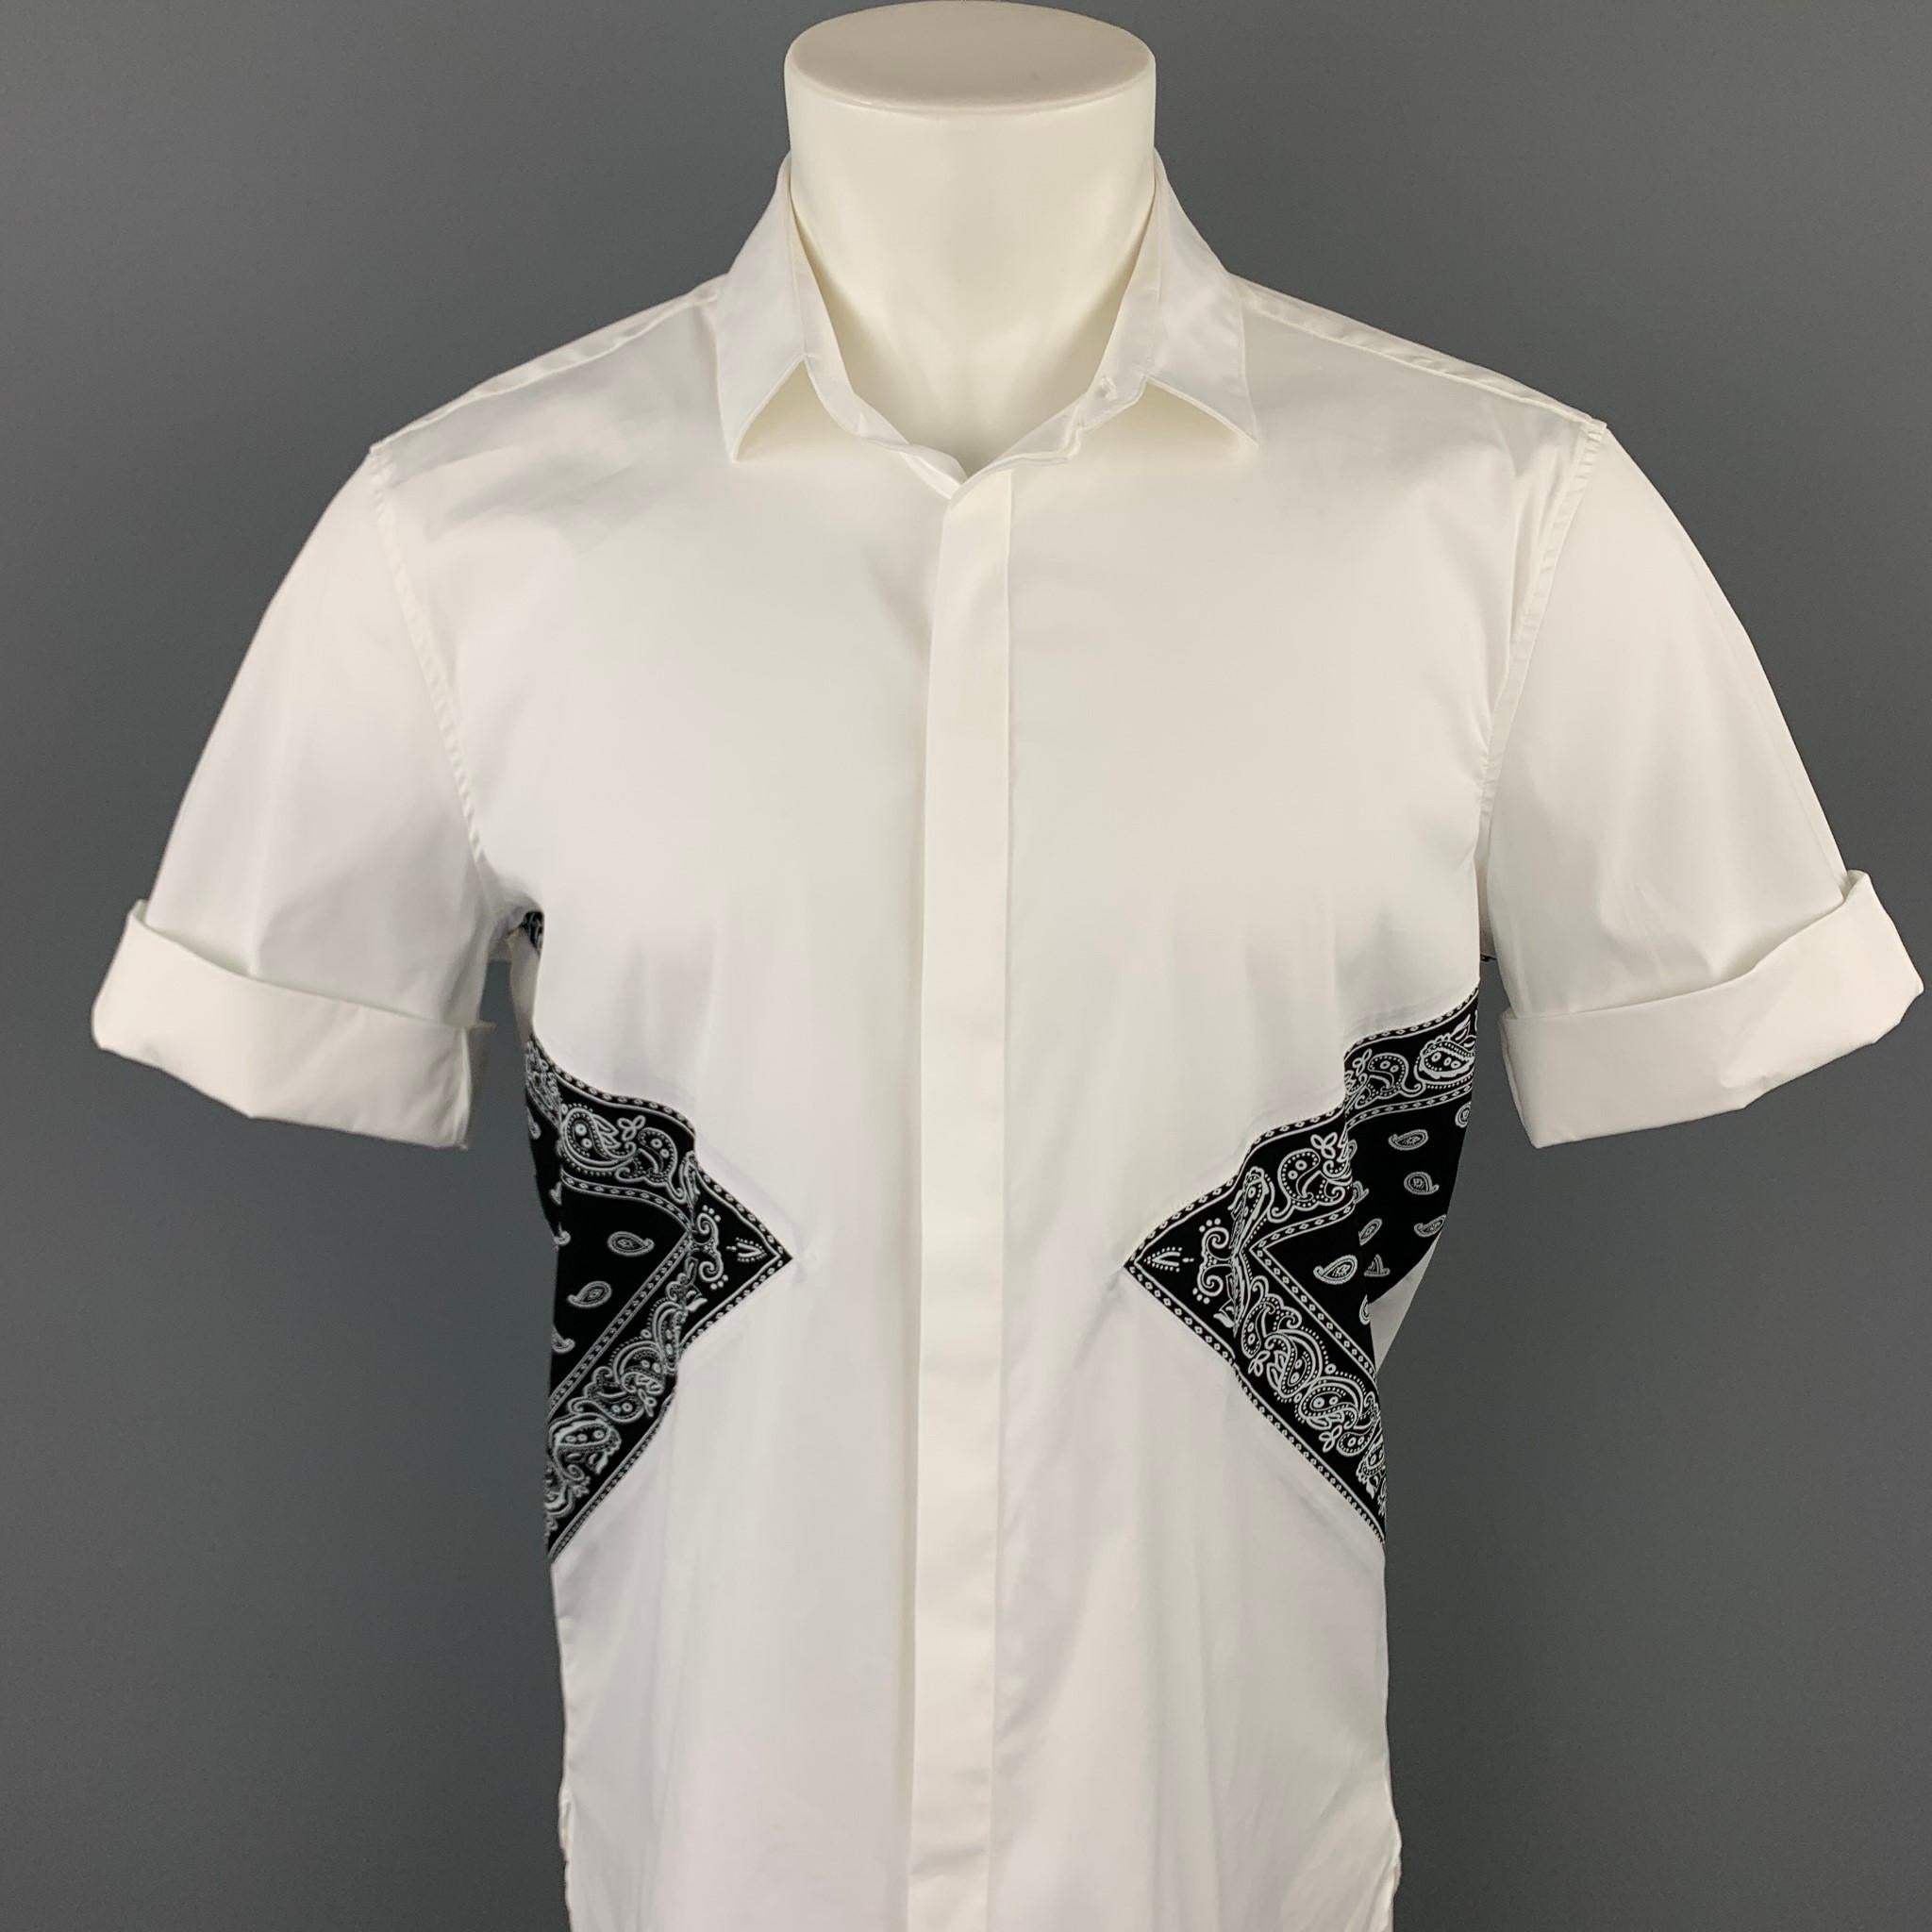 NEIL BARRETT short sleeve shirt comes in a white cotton wih a black bandana print trim featuring a button up style, loose fit, cuffed sleeves, spread collar, and a hidden button closure. Made in Italy.

Very Good Pre-Owned Condition.
Marked: